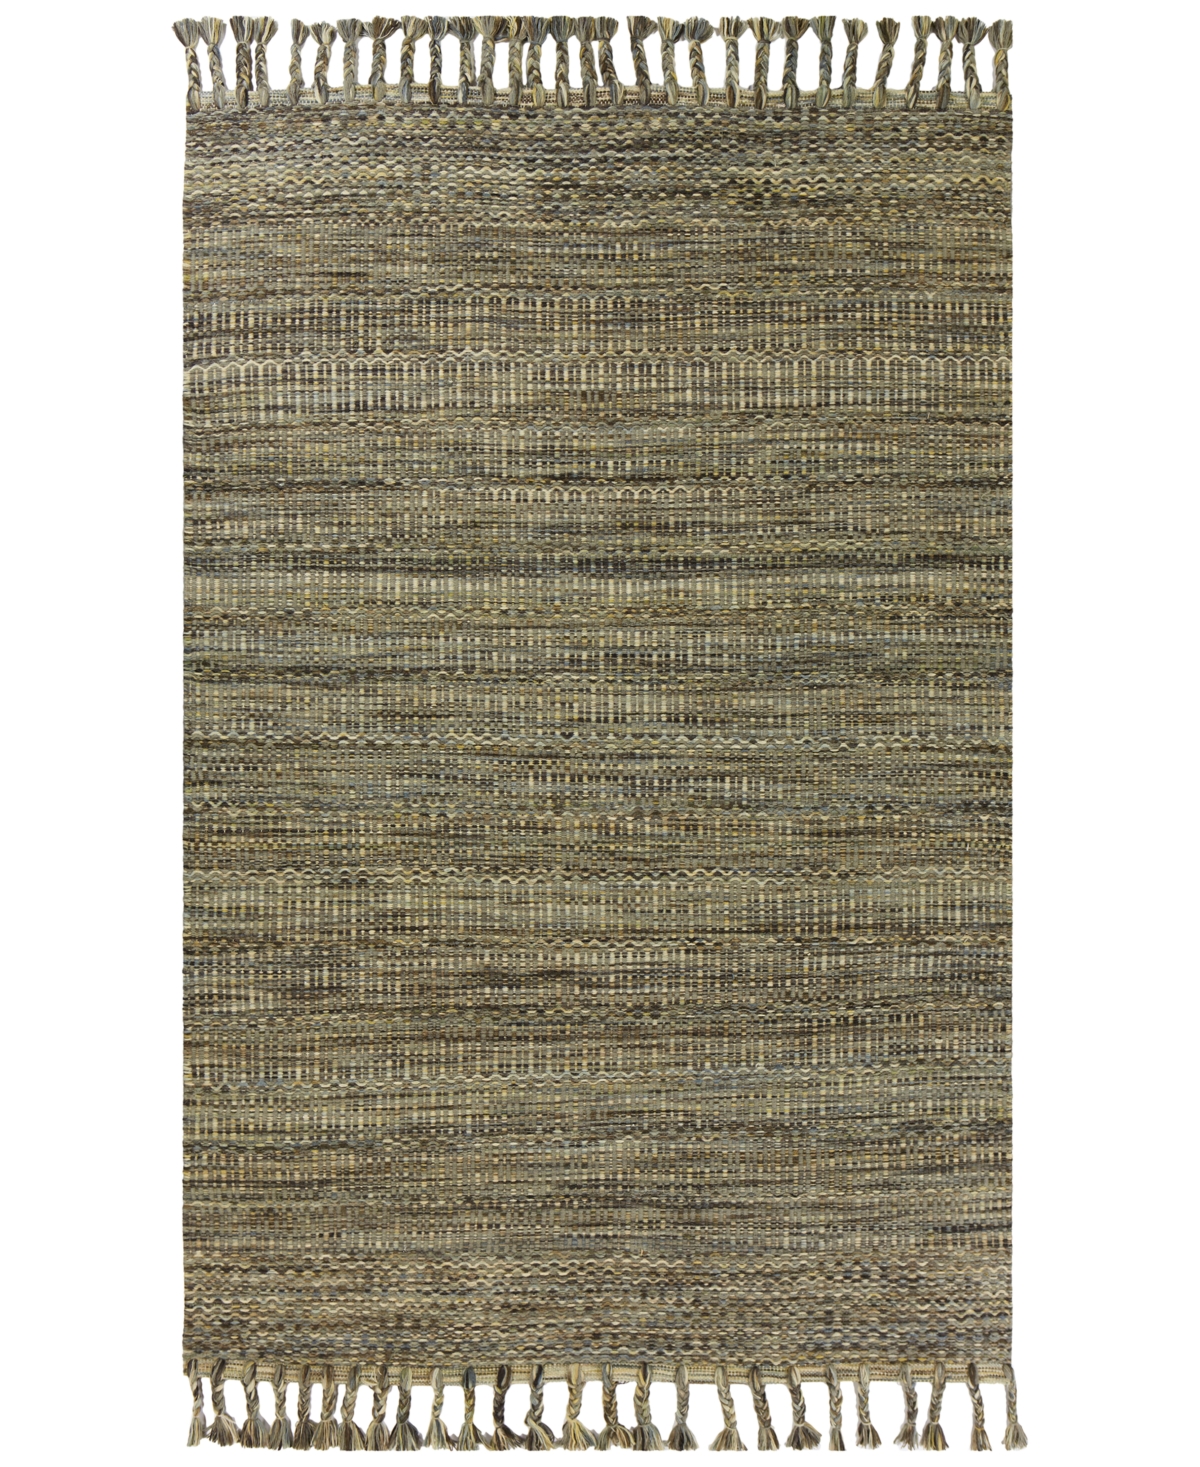 Libby Langdon Homespun Mission 5' X 8' Area Rug In Slate